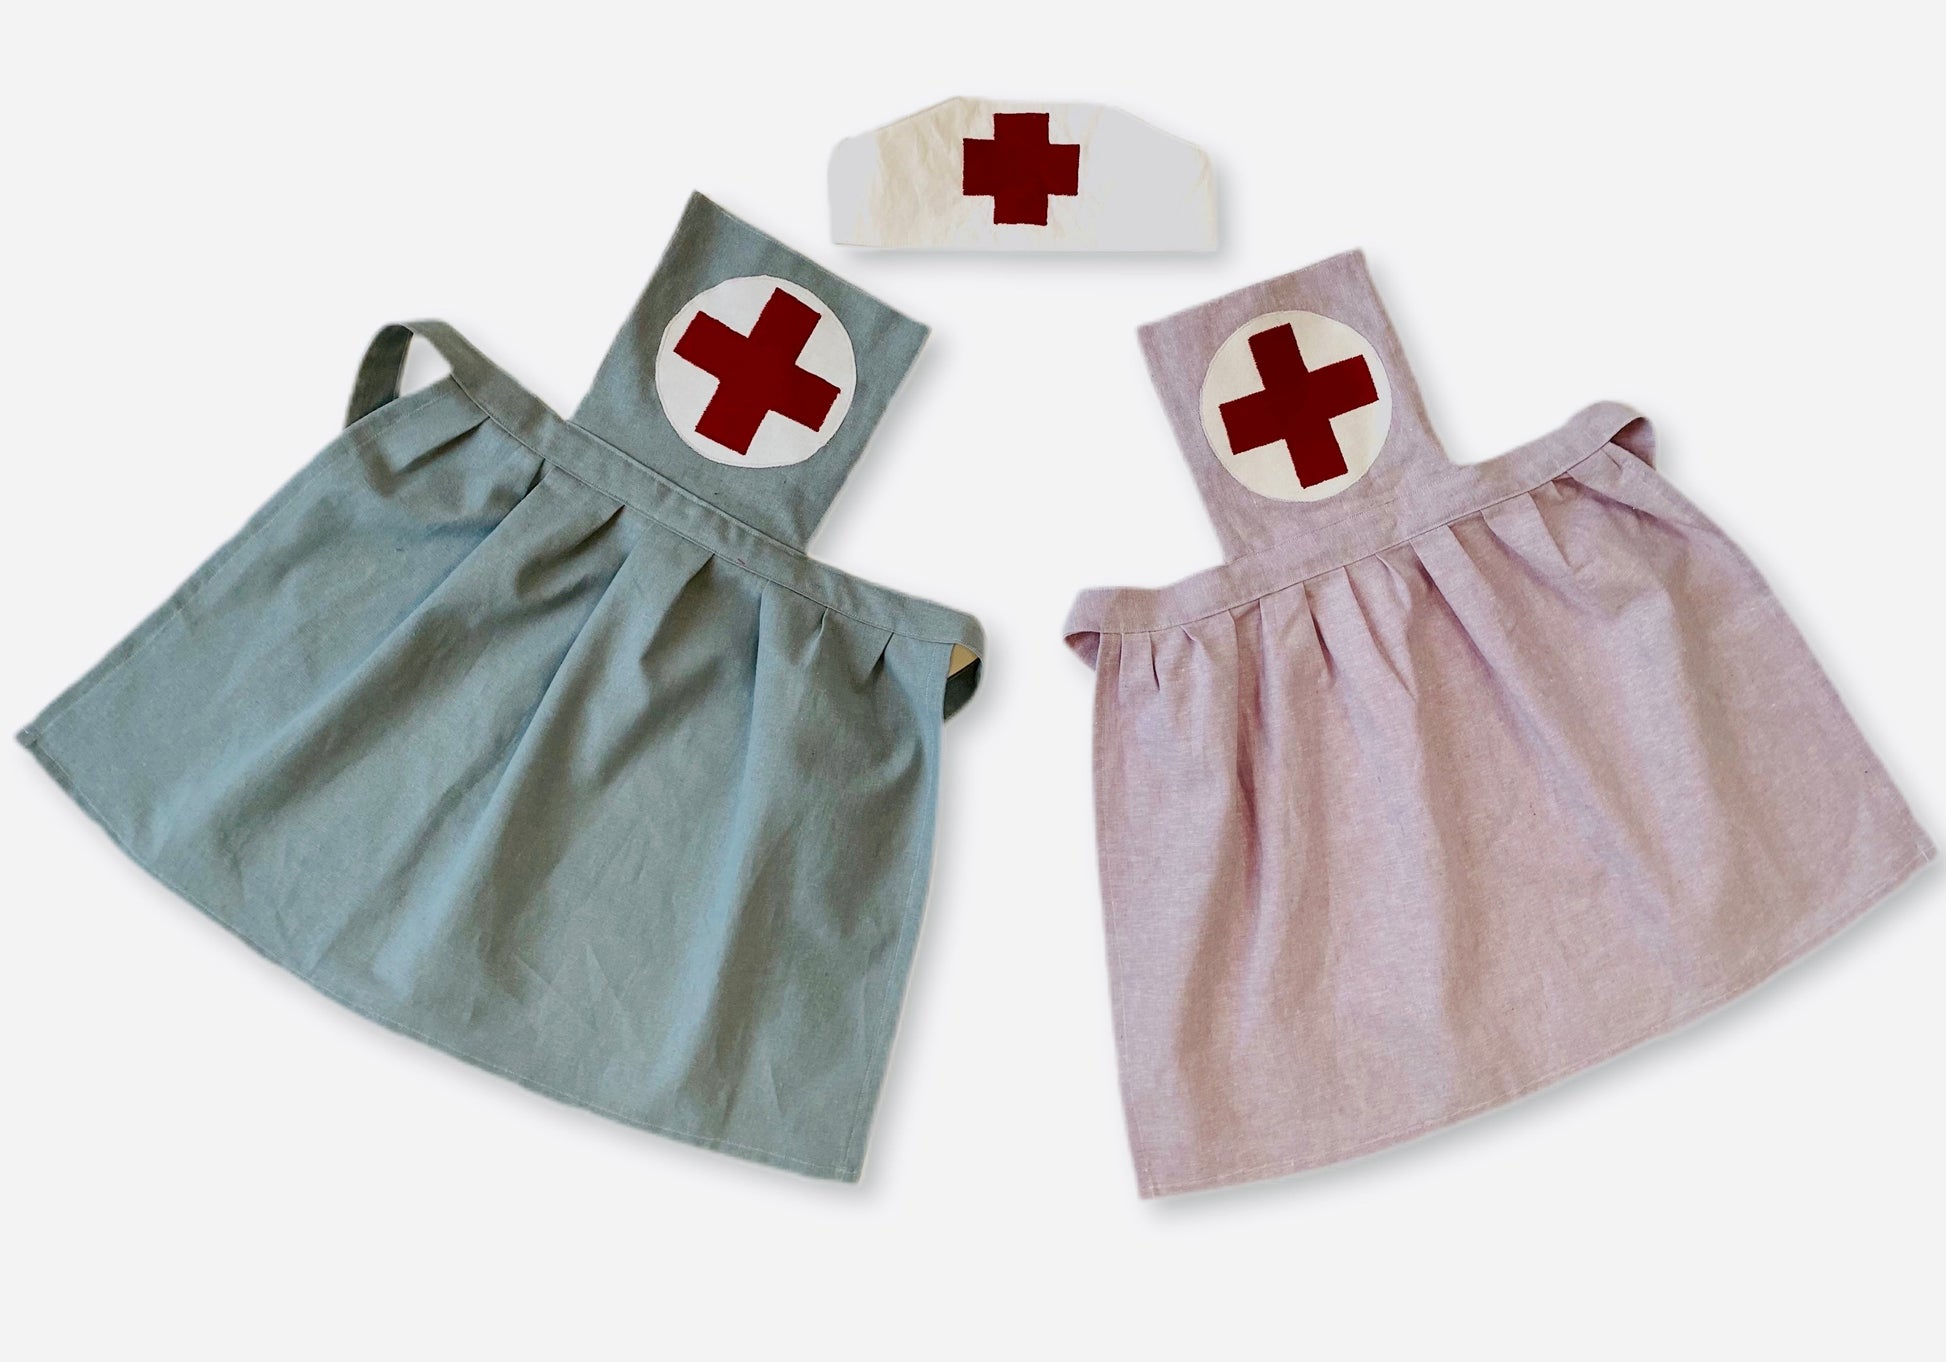 Blue and lilac nurse apron and hat for children's doctor dress up game